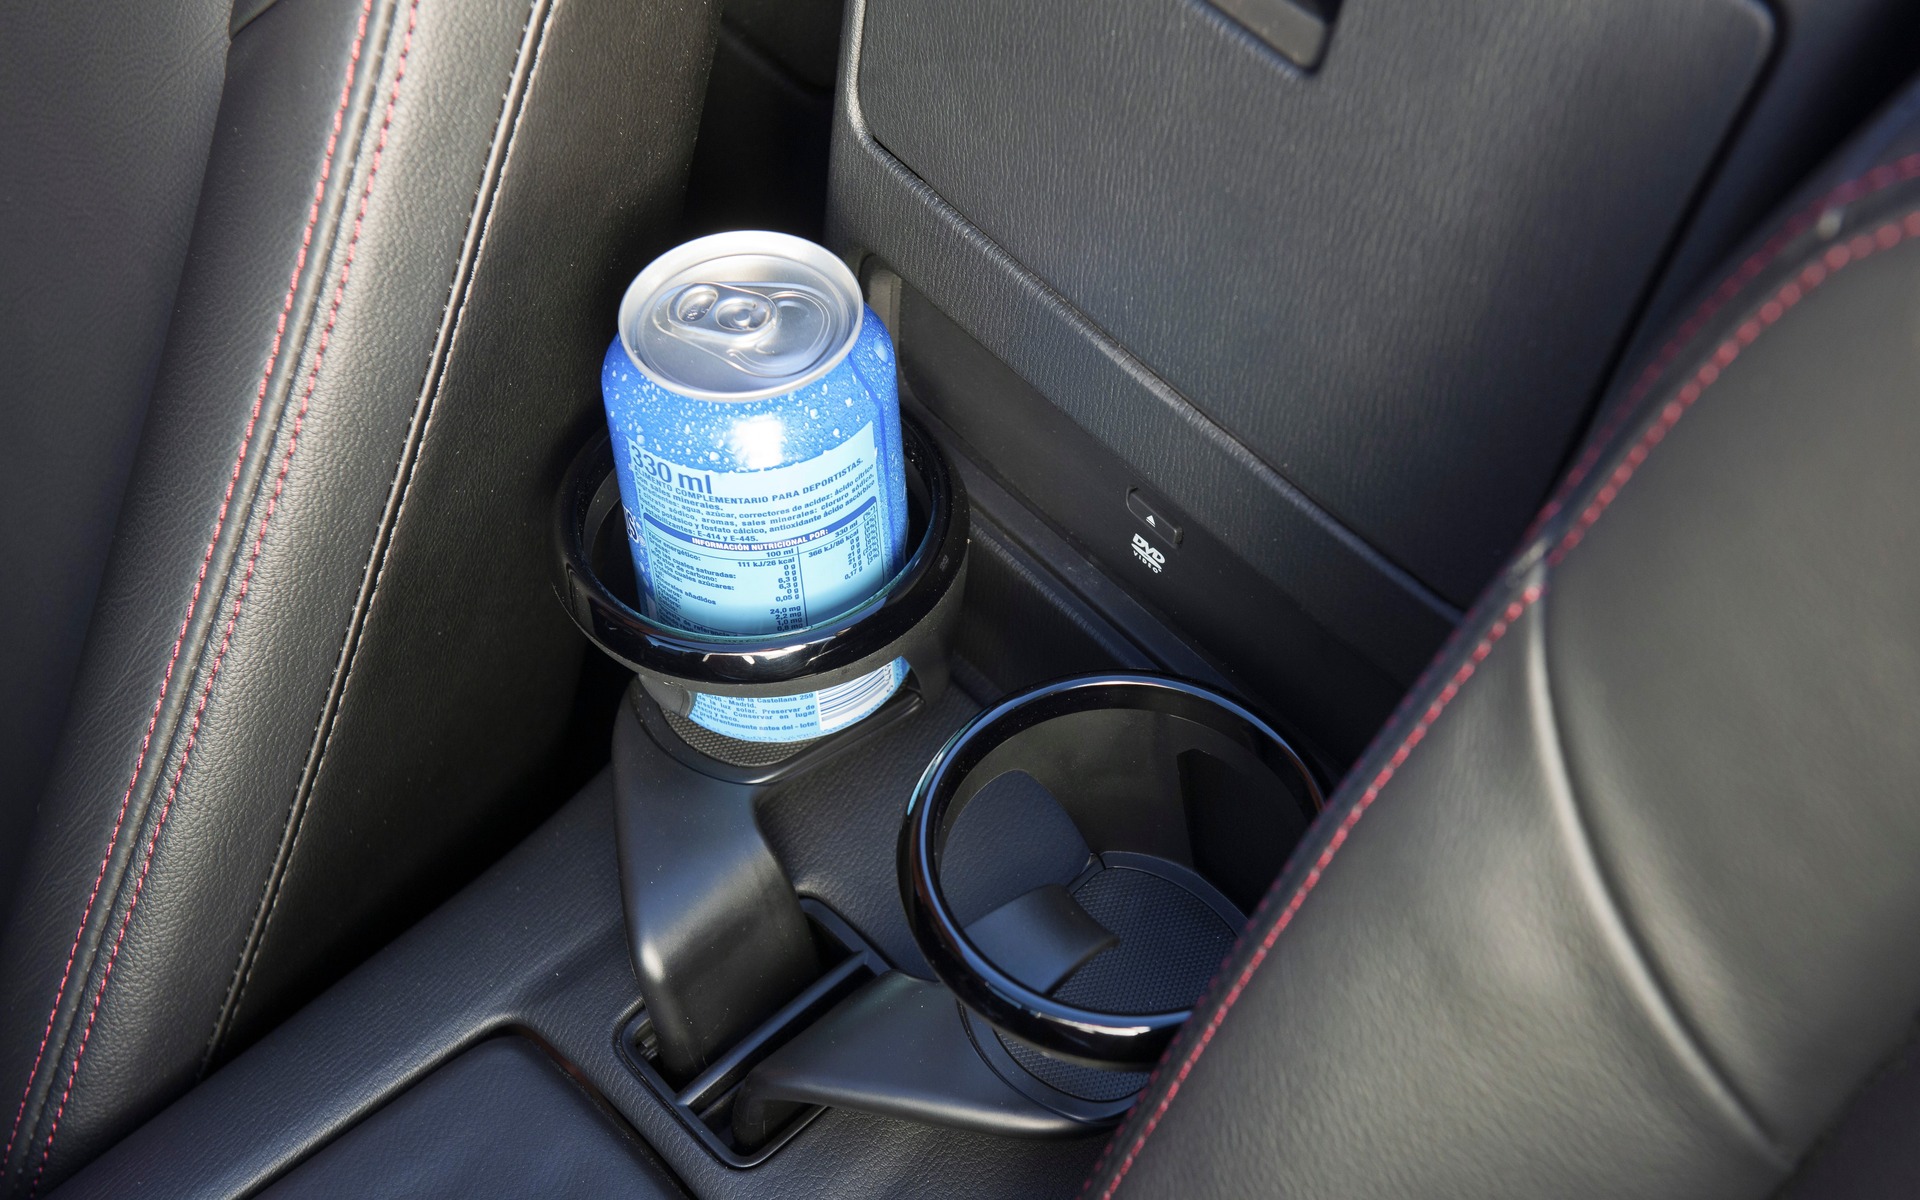 The cupholders are fairly useless due to their location.